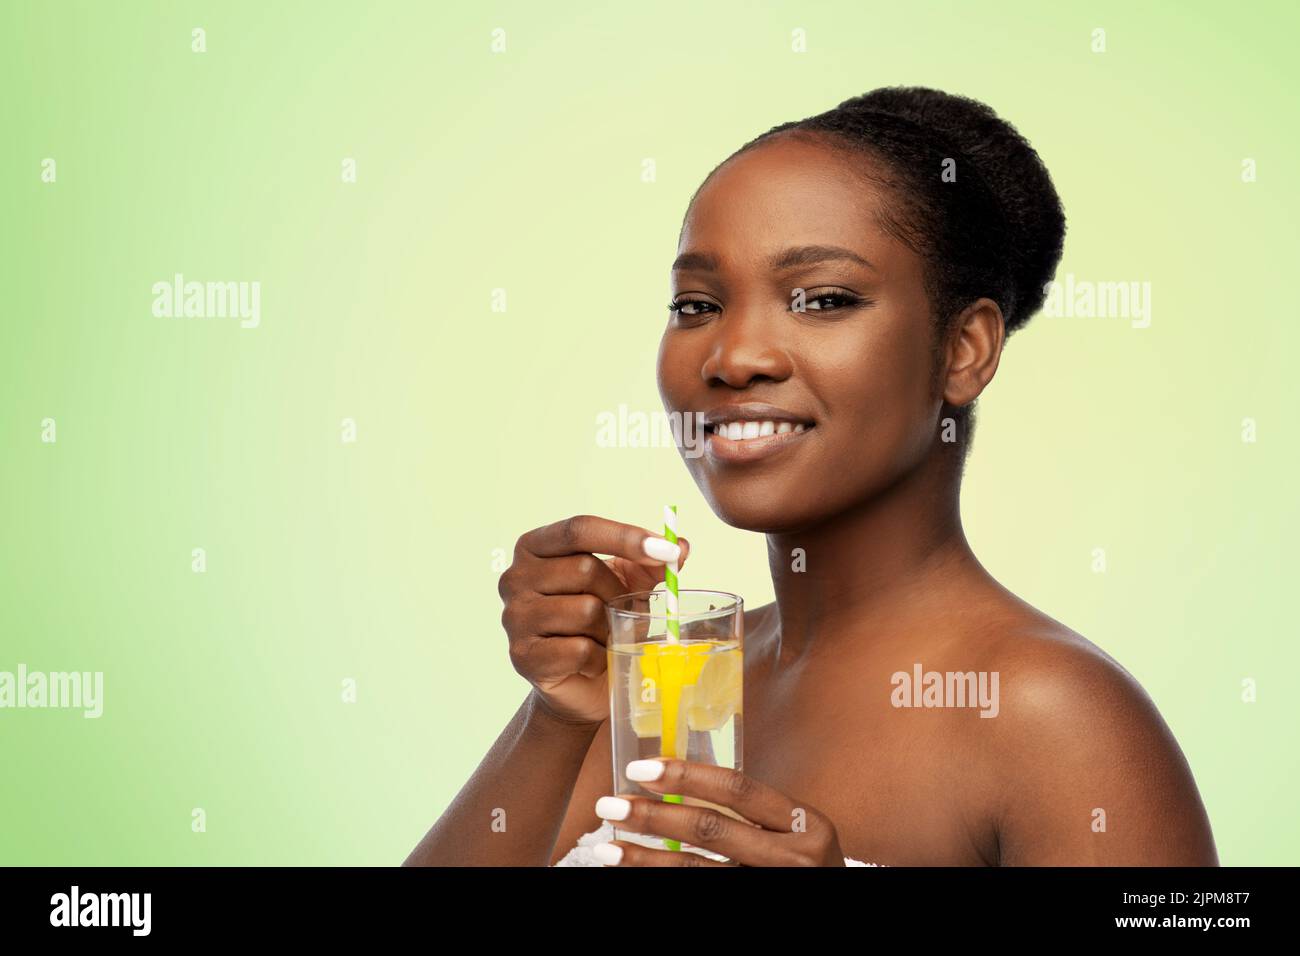 Women In White Underwear Holding Glasses Of Water With Lemon Stock